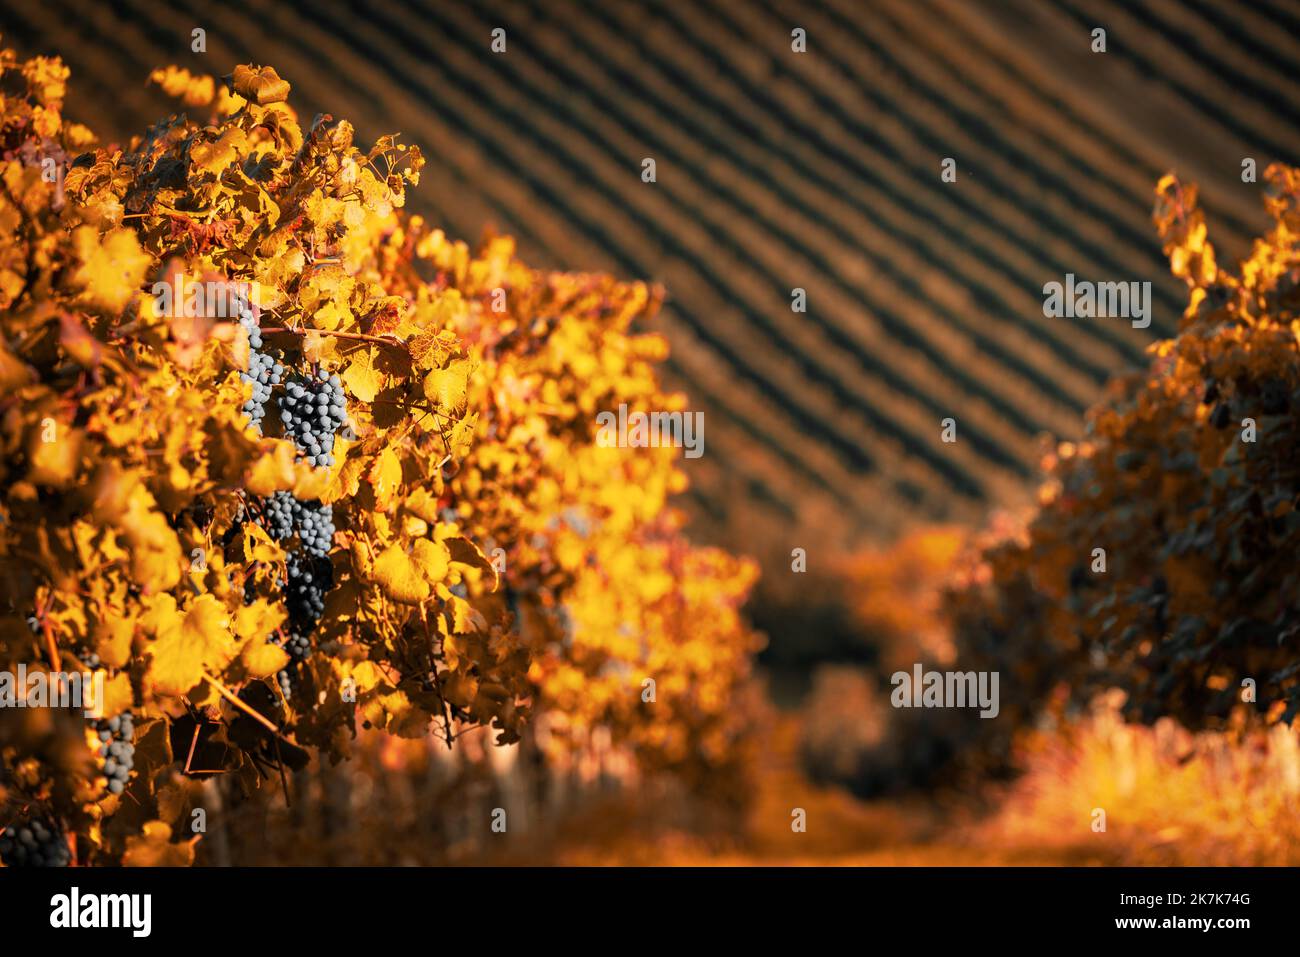 Vineyards at sunset in autumn harvest. Ripe grapes in fall. Stock Photo